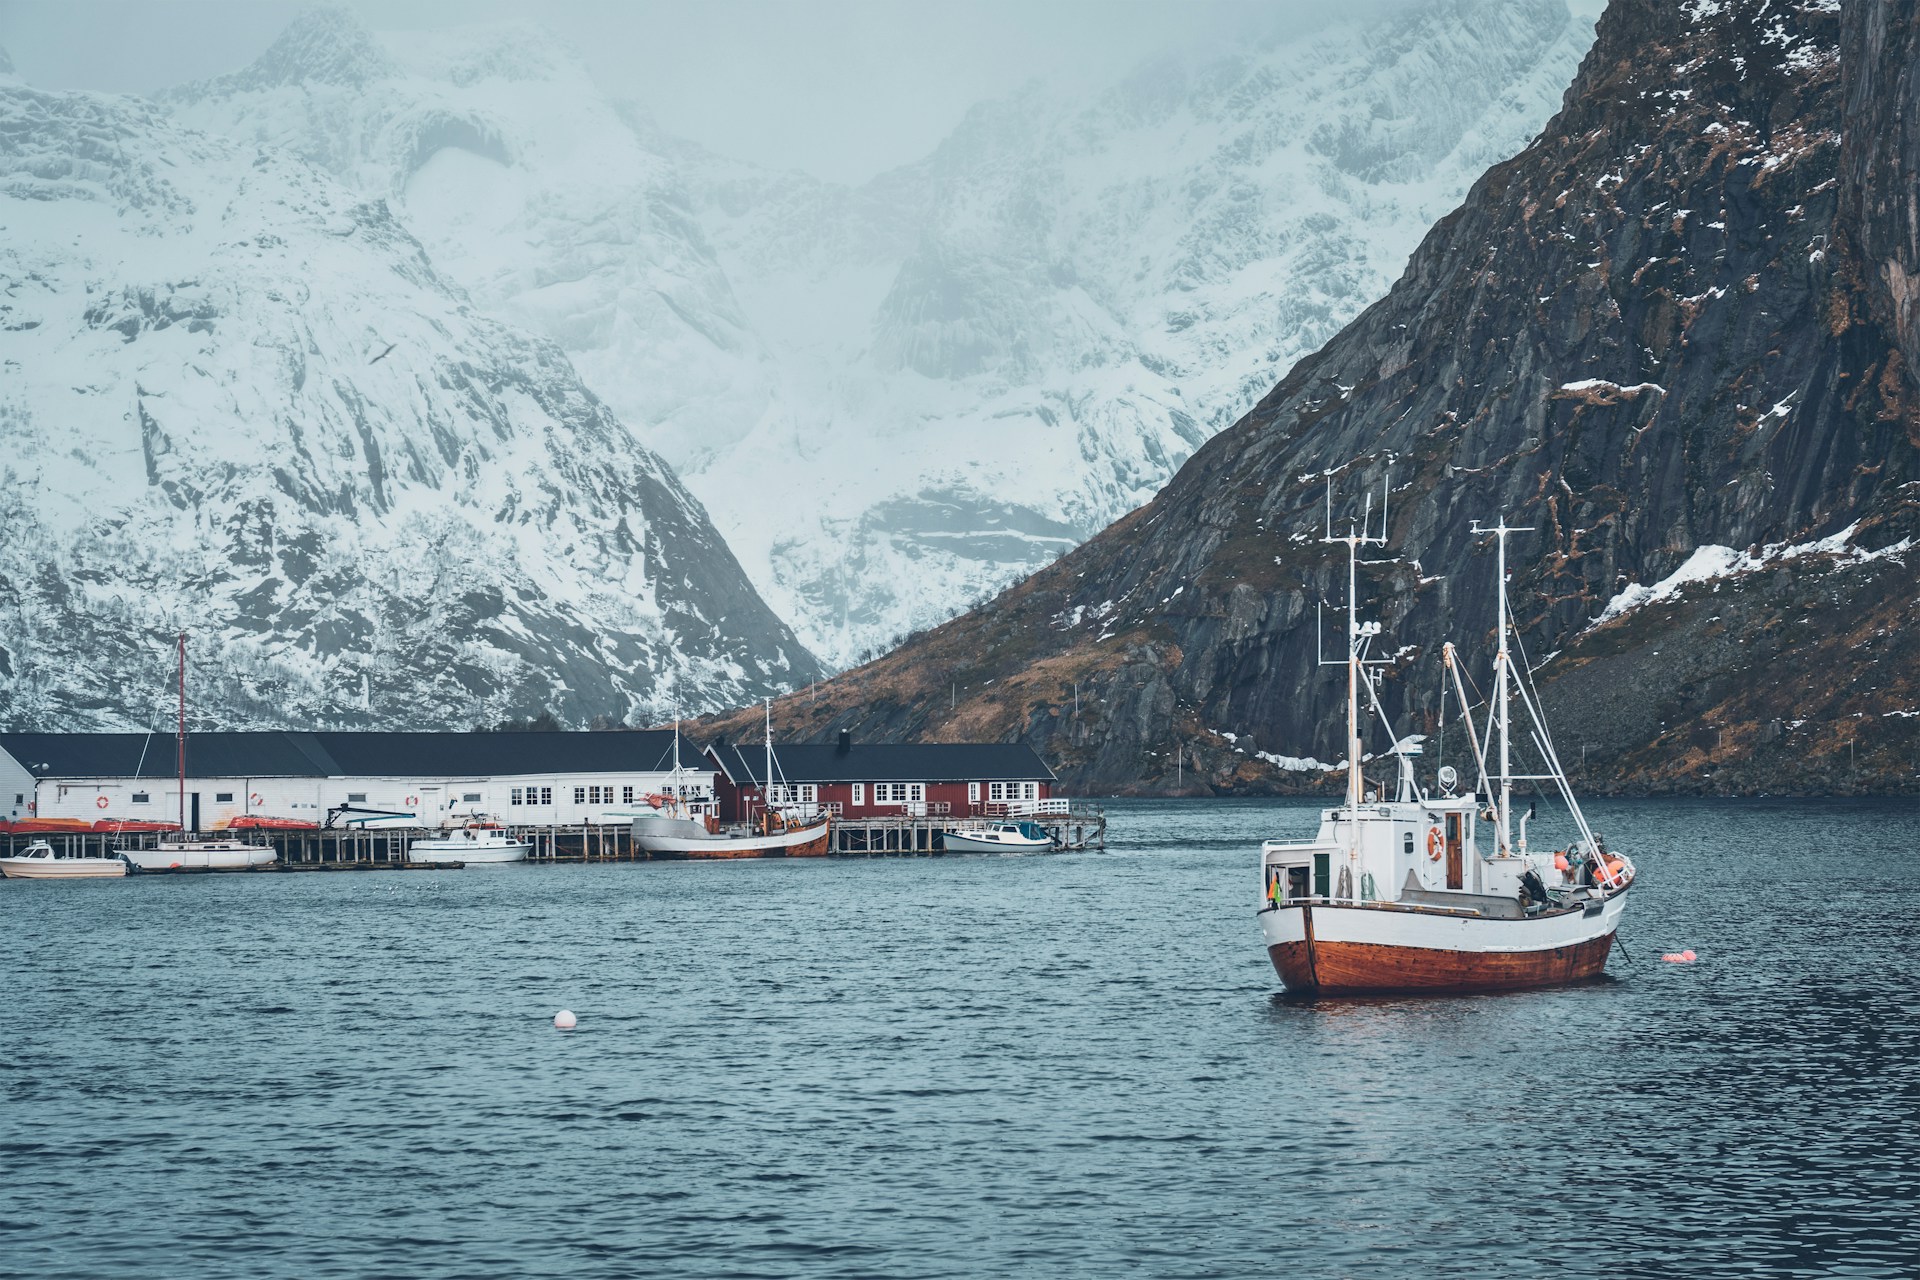 A fishing boat surrouned by mountains